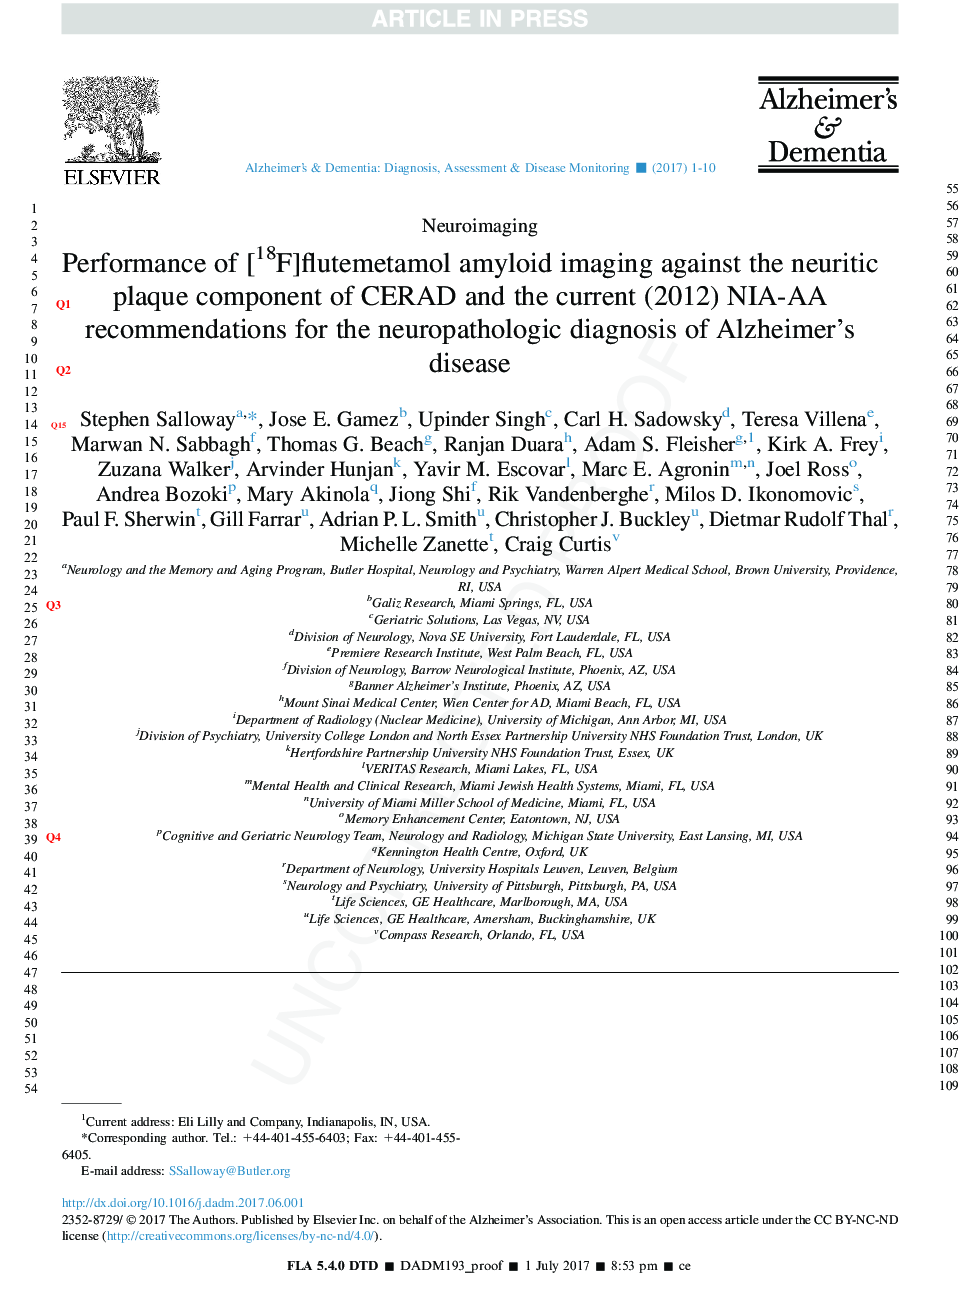 Performance of [18F]flutemetamol amyloid imaging against the neuritic plaque component of CERAD and the current (2012) NIA-AA recommendations for the neuropathologic diagnosis of Alzheimer's disease